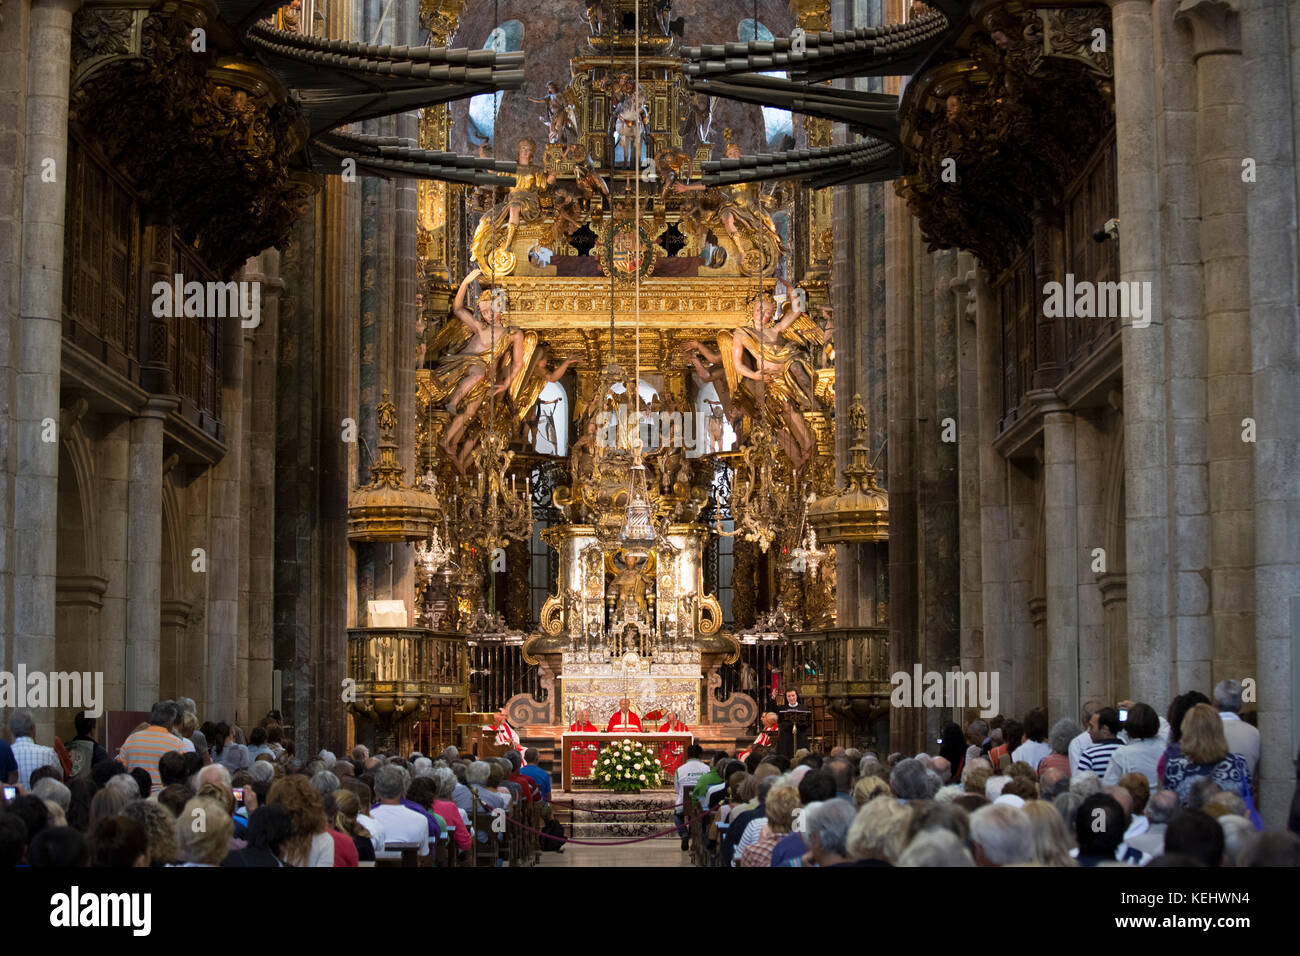 Mass being celebrated by priest in Roman Catholic cathedral, Catedral de Santiago de Compostela, Galicia, Spain Stock Photo